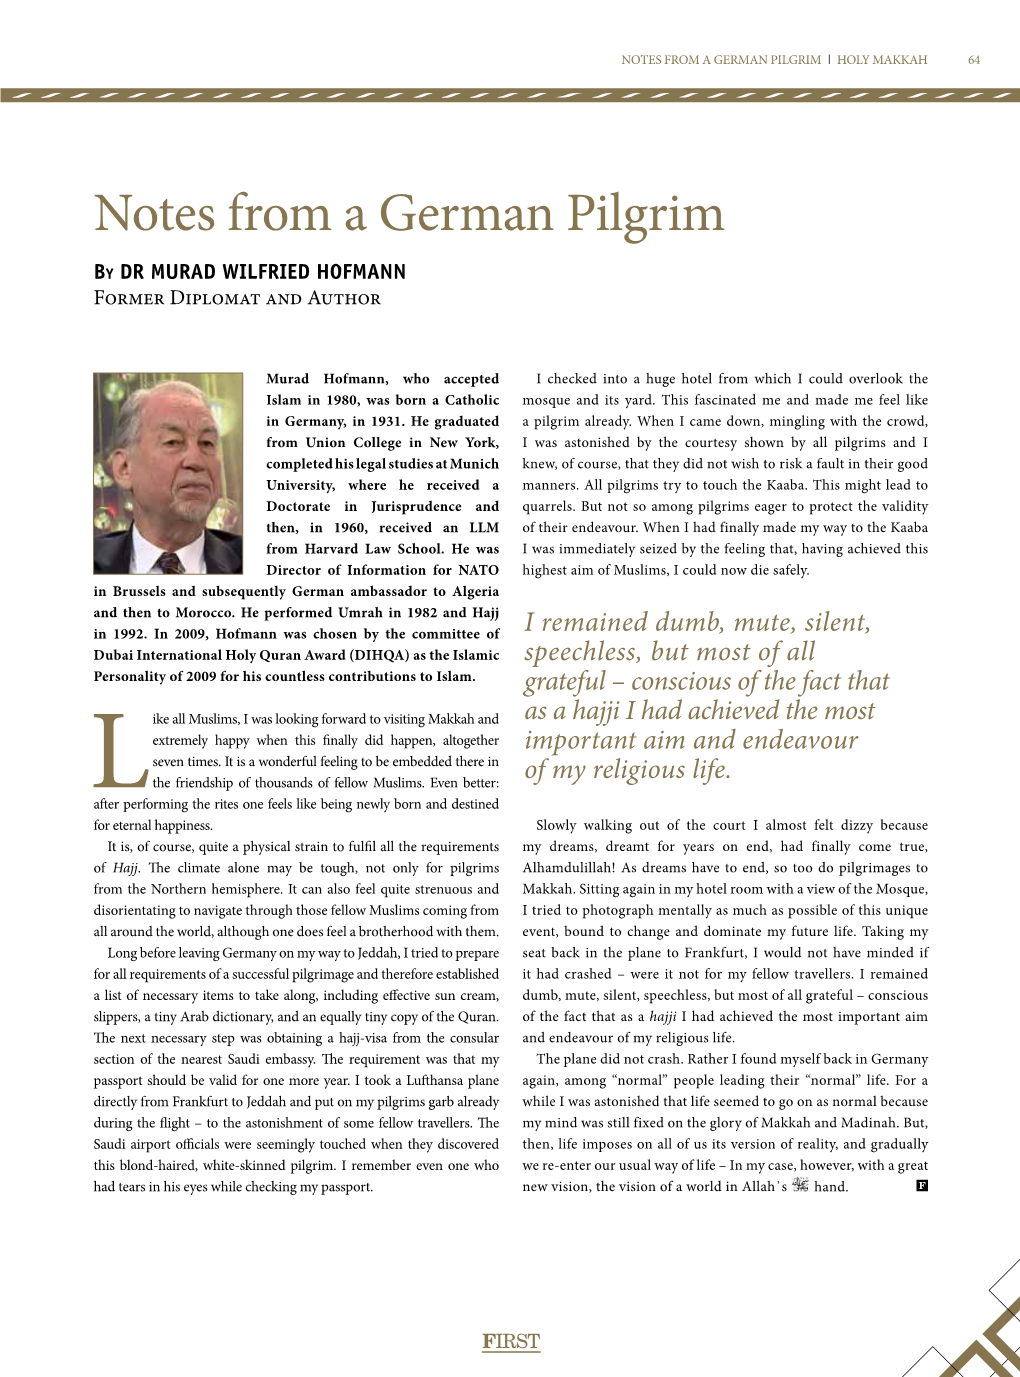 Notes from a German Pilgrim | Holy Makkah 64